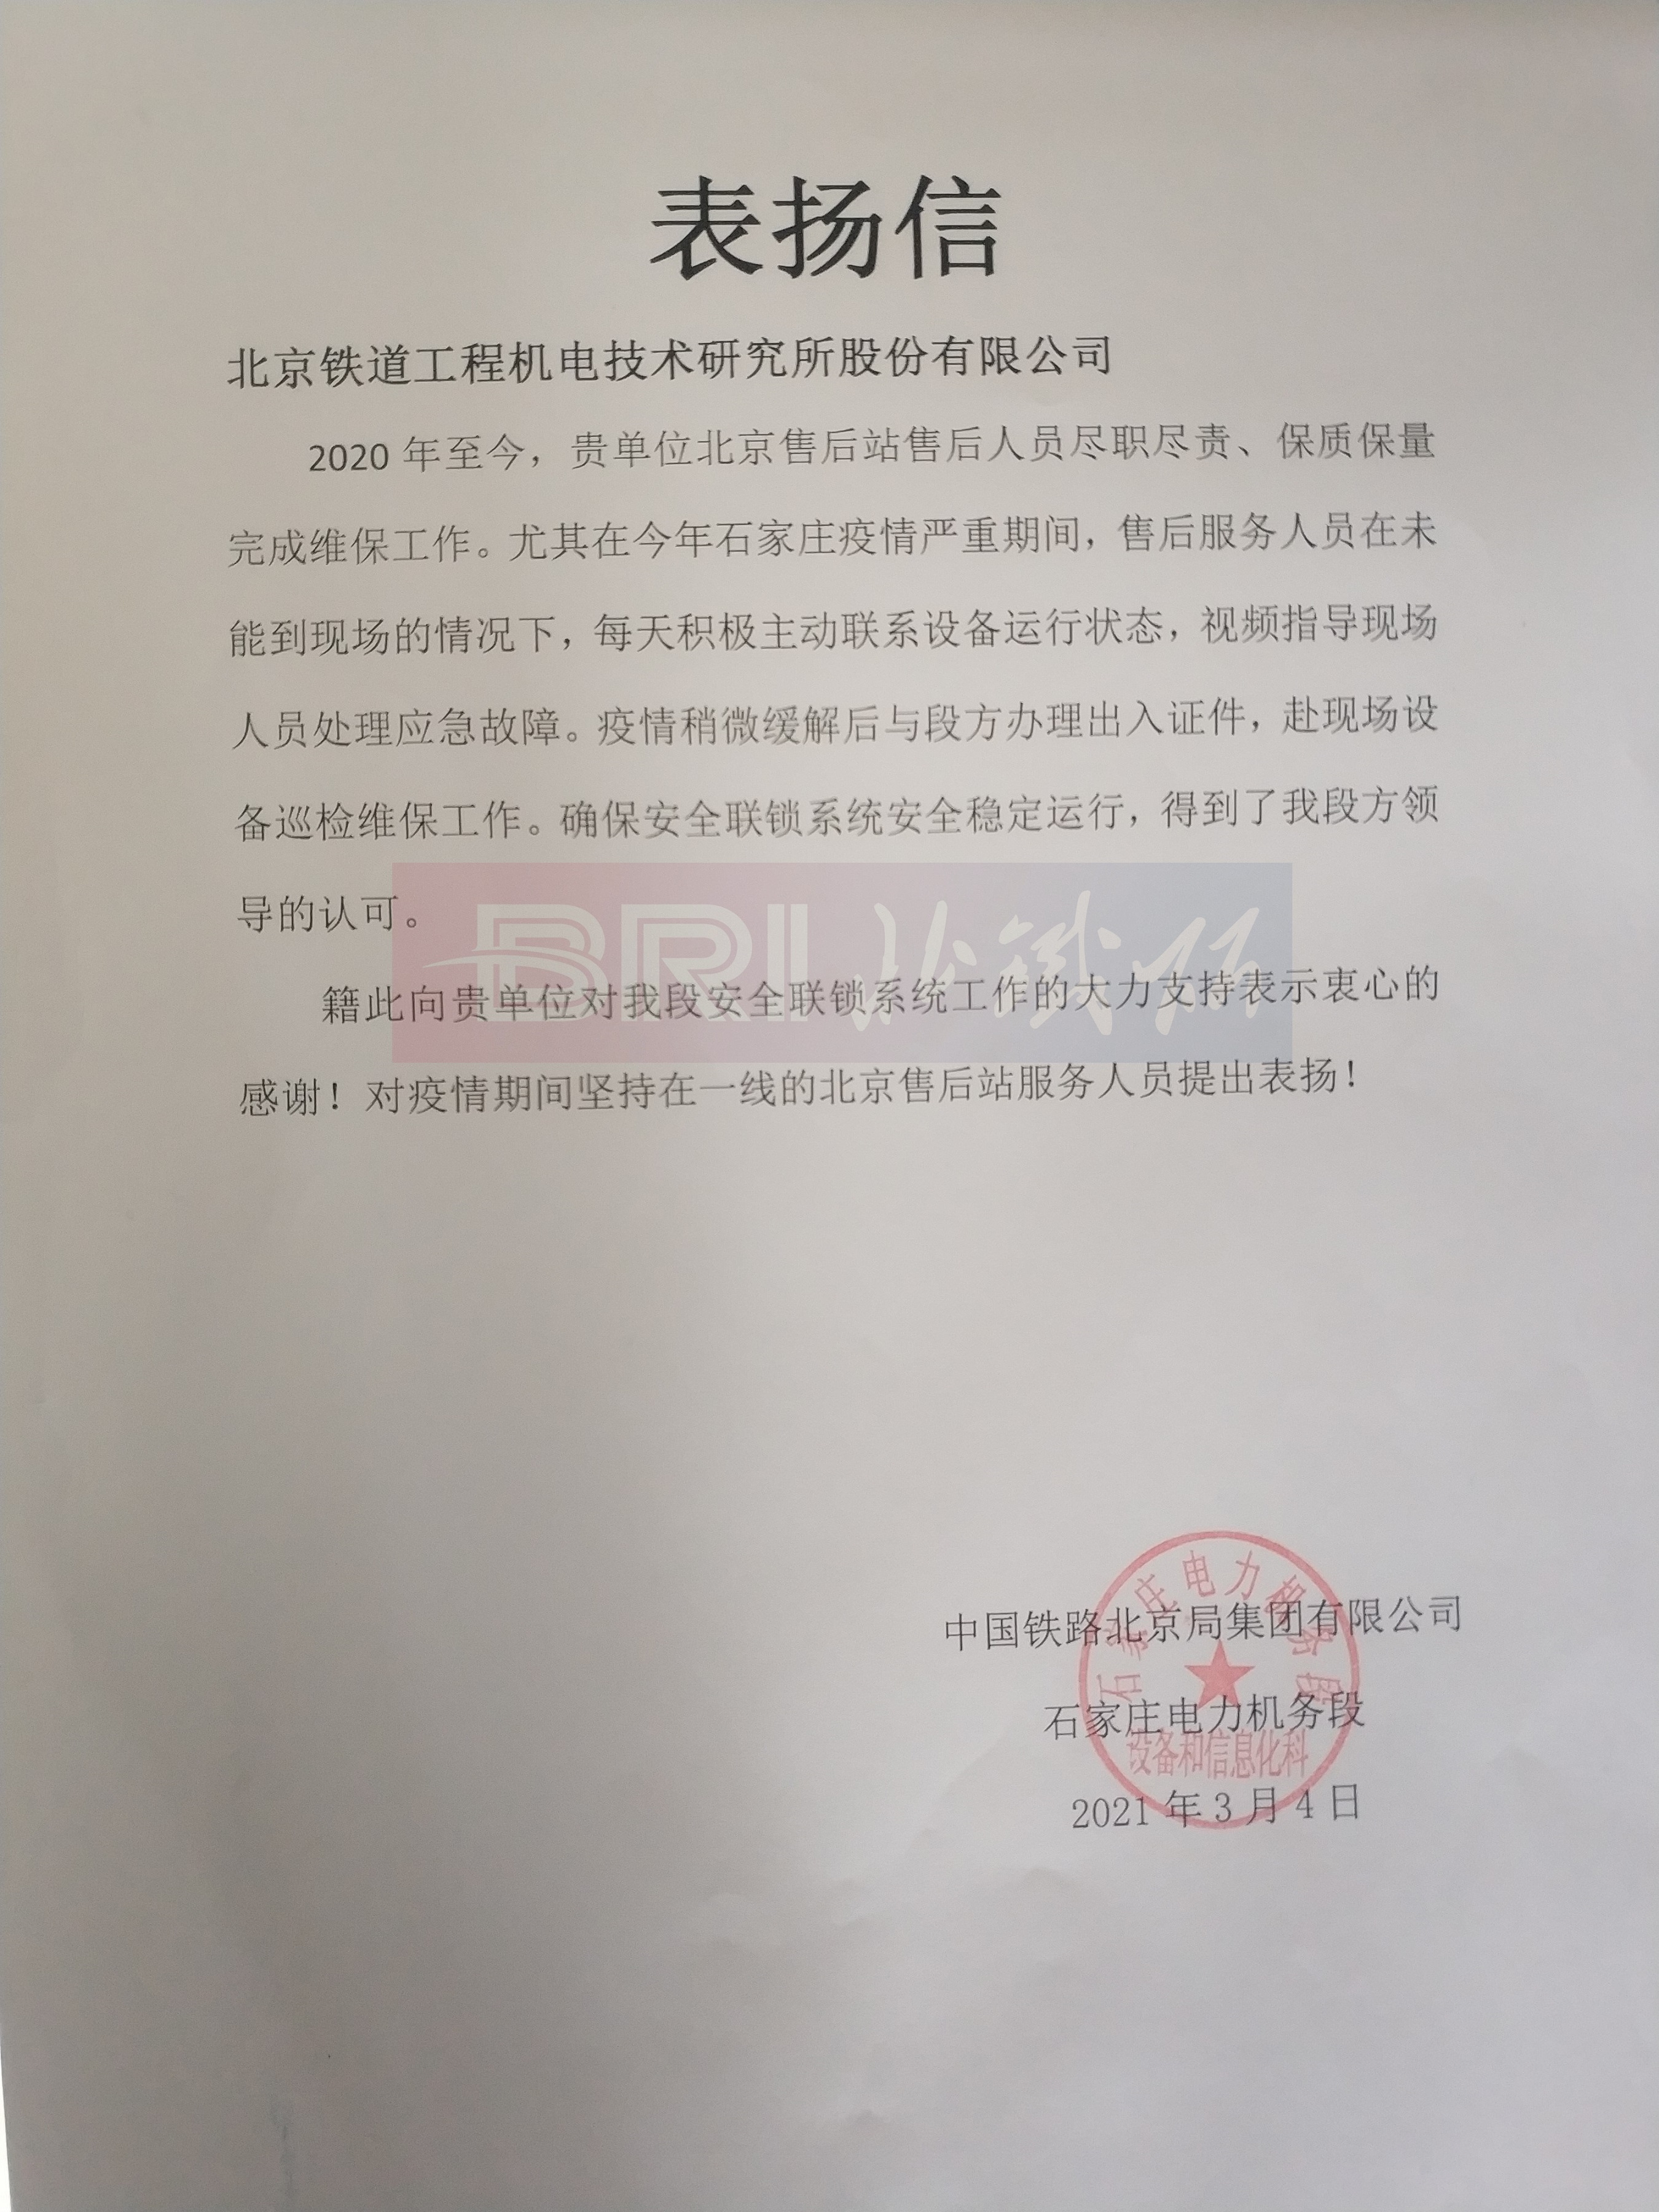 The commendation letter from Shijiazhuang Electric Locomotive Depot